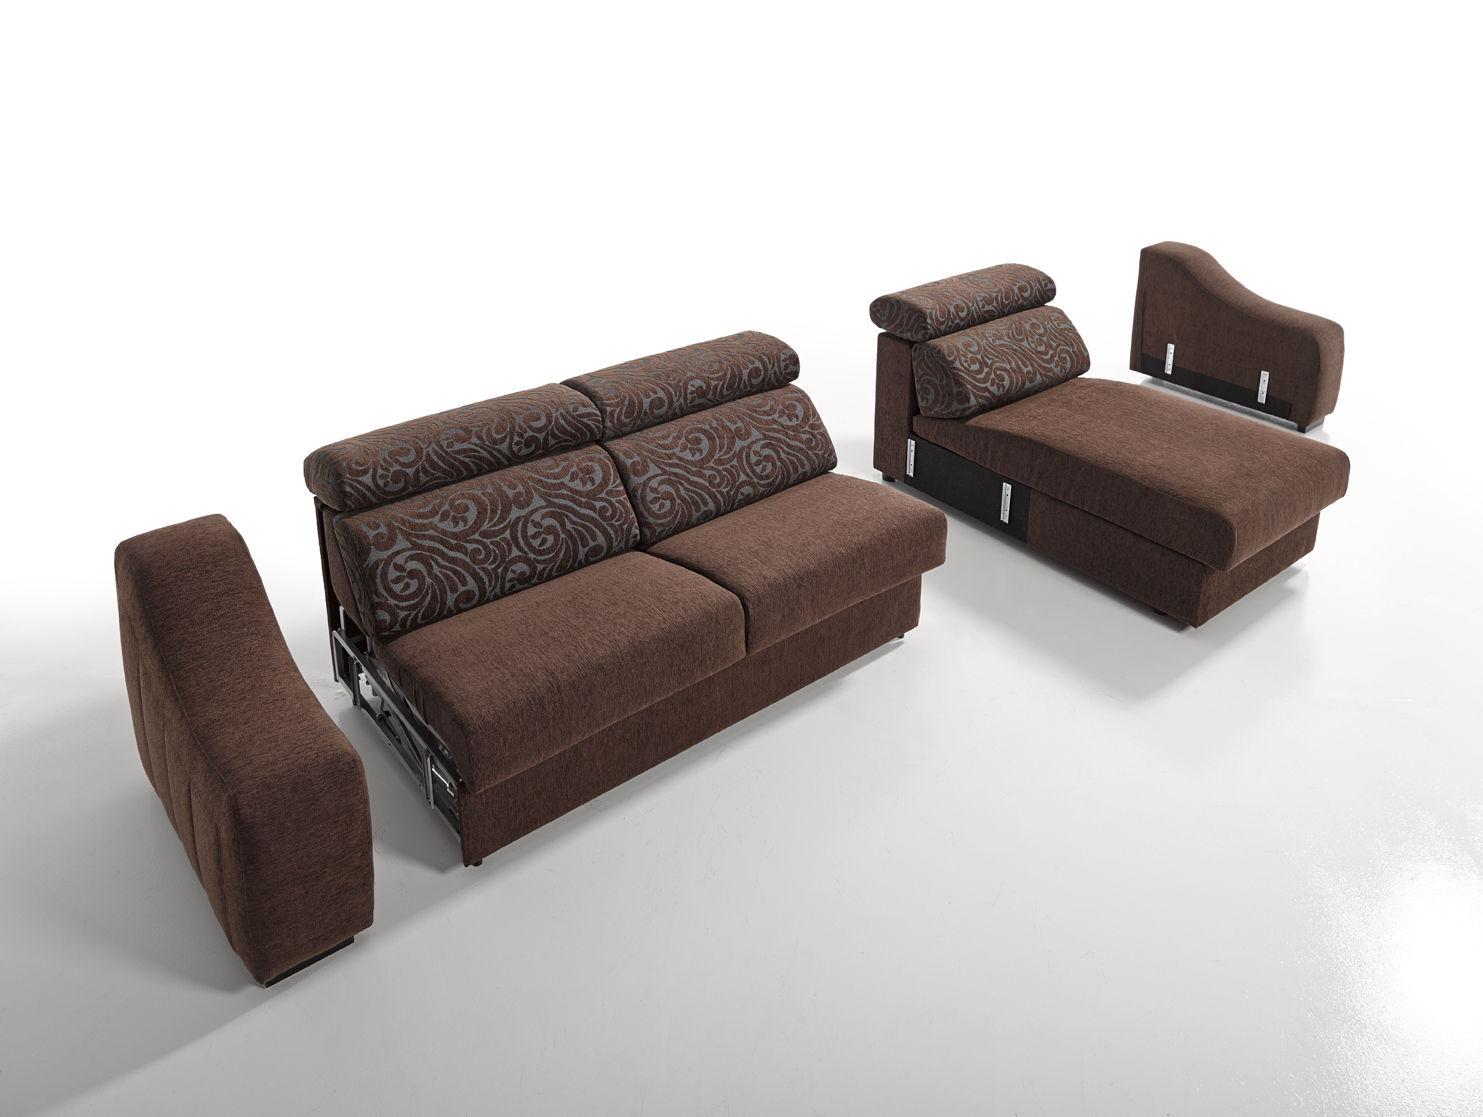 

    
ESF Ronaldo Sectional-RHC ESF Ronaldo Brown Chic Fabric Right Sectional Sofa Sleeper Bed Made in Spain
